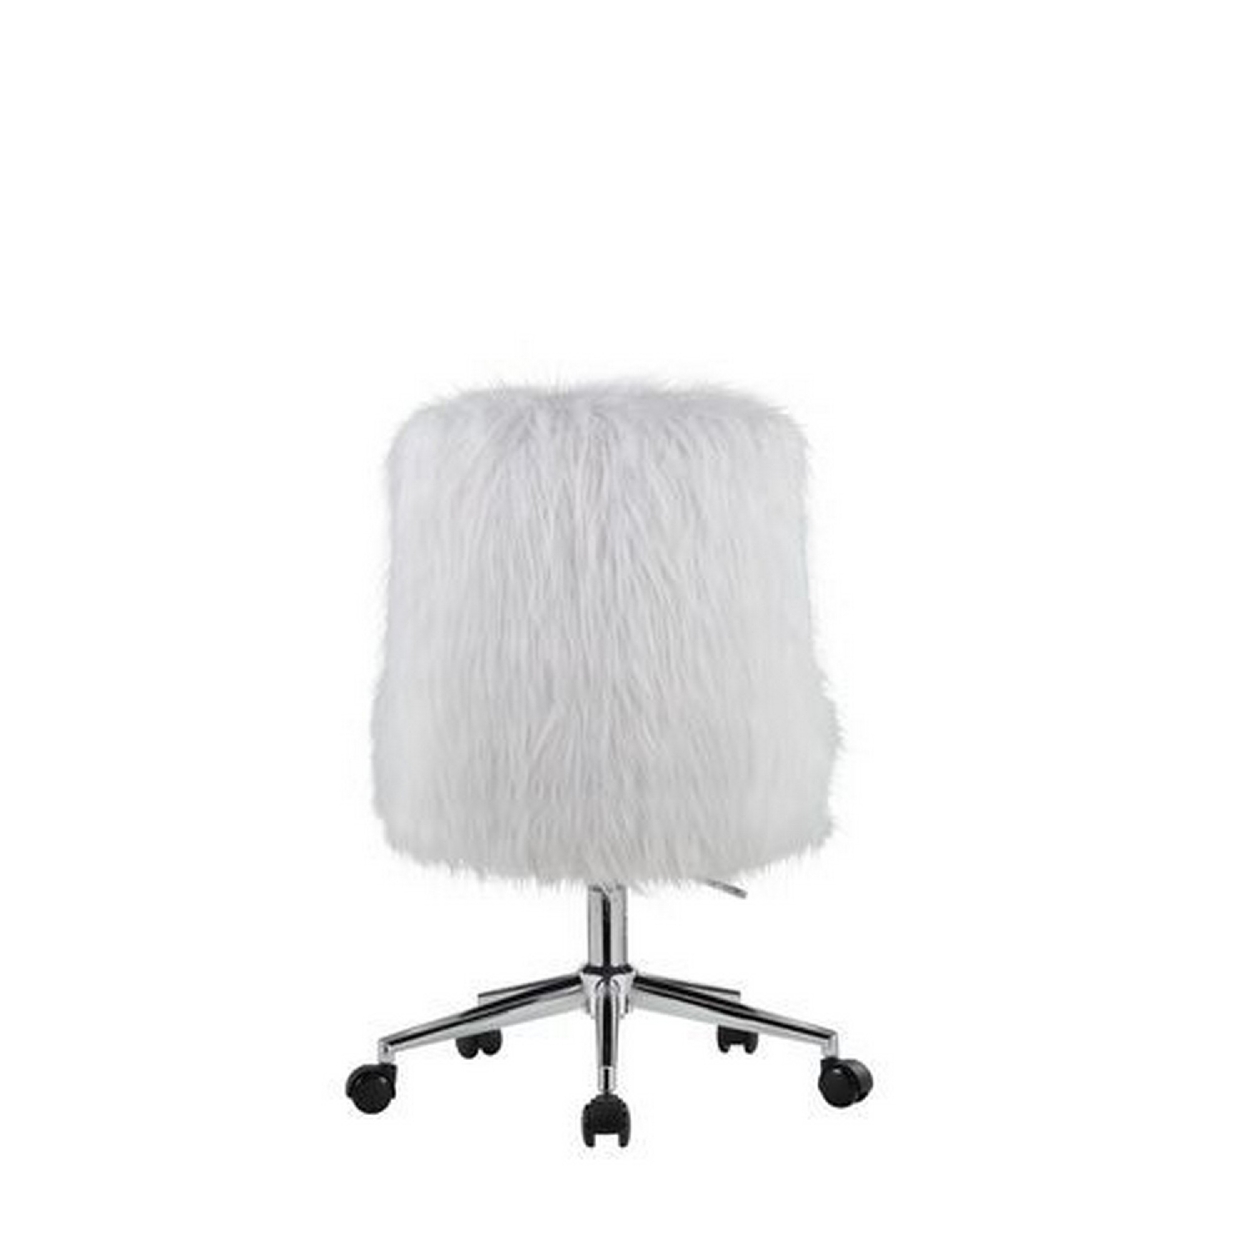 Swivel Office Chair With Faux Fur Fabric, White And Chrome- Saltoro Sherpi